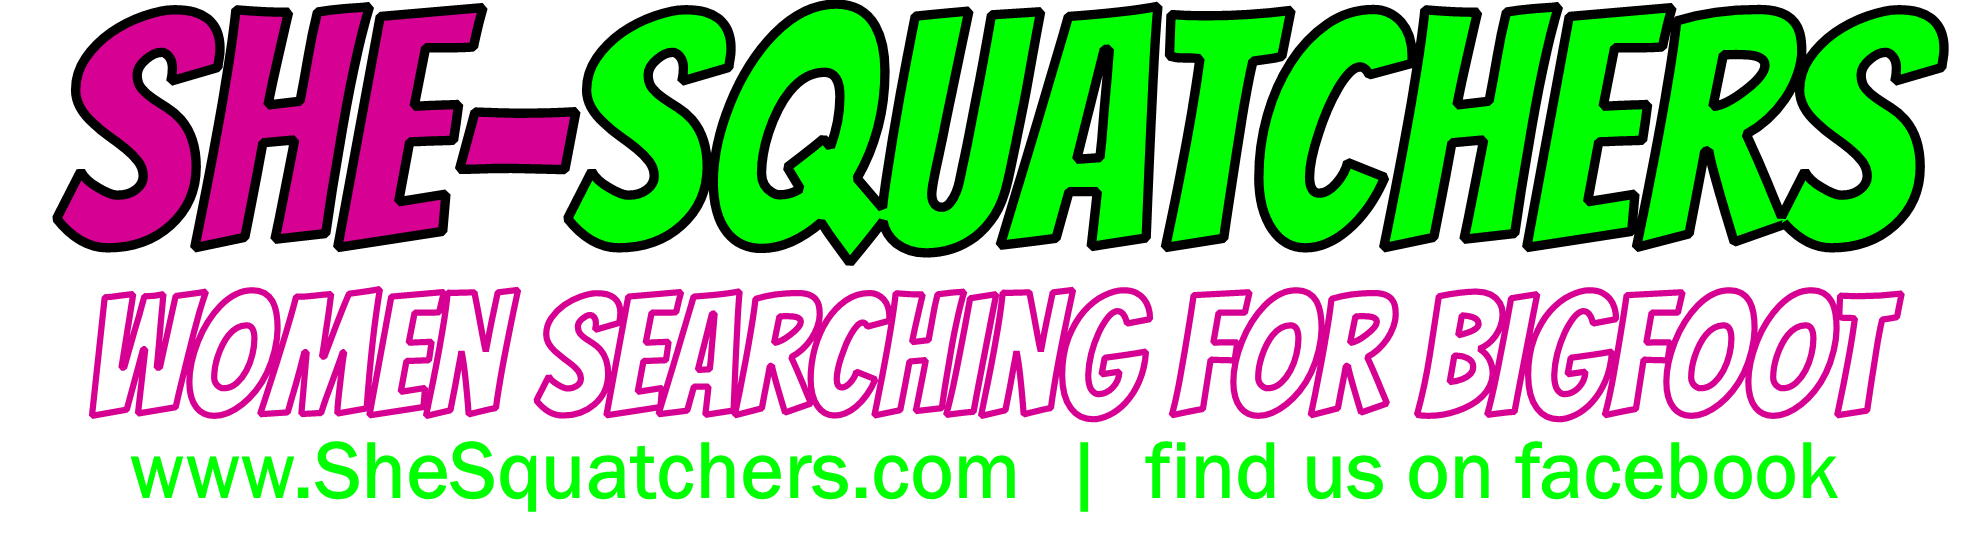 She-Squatchers - first all female bigfoot research team in midwest - SheSquatchers.com  